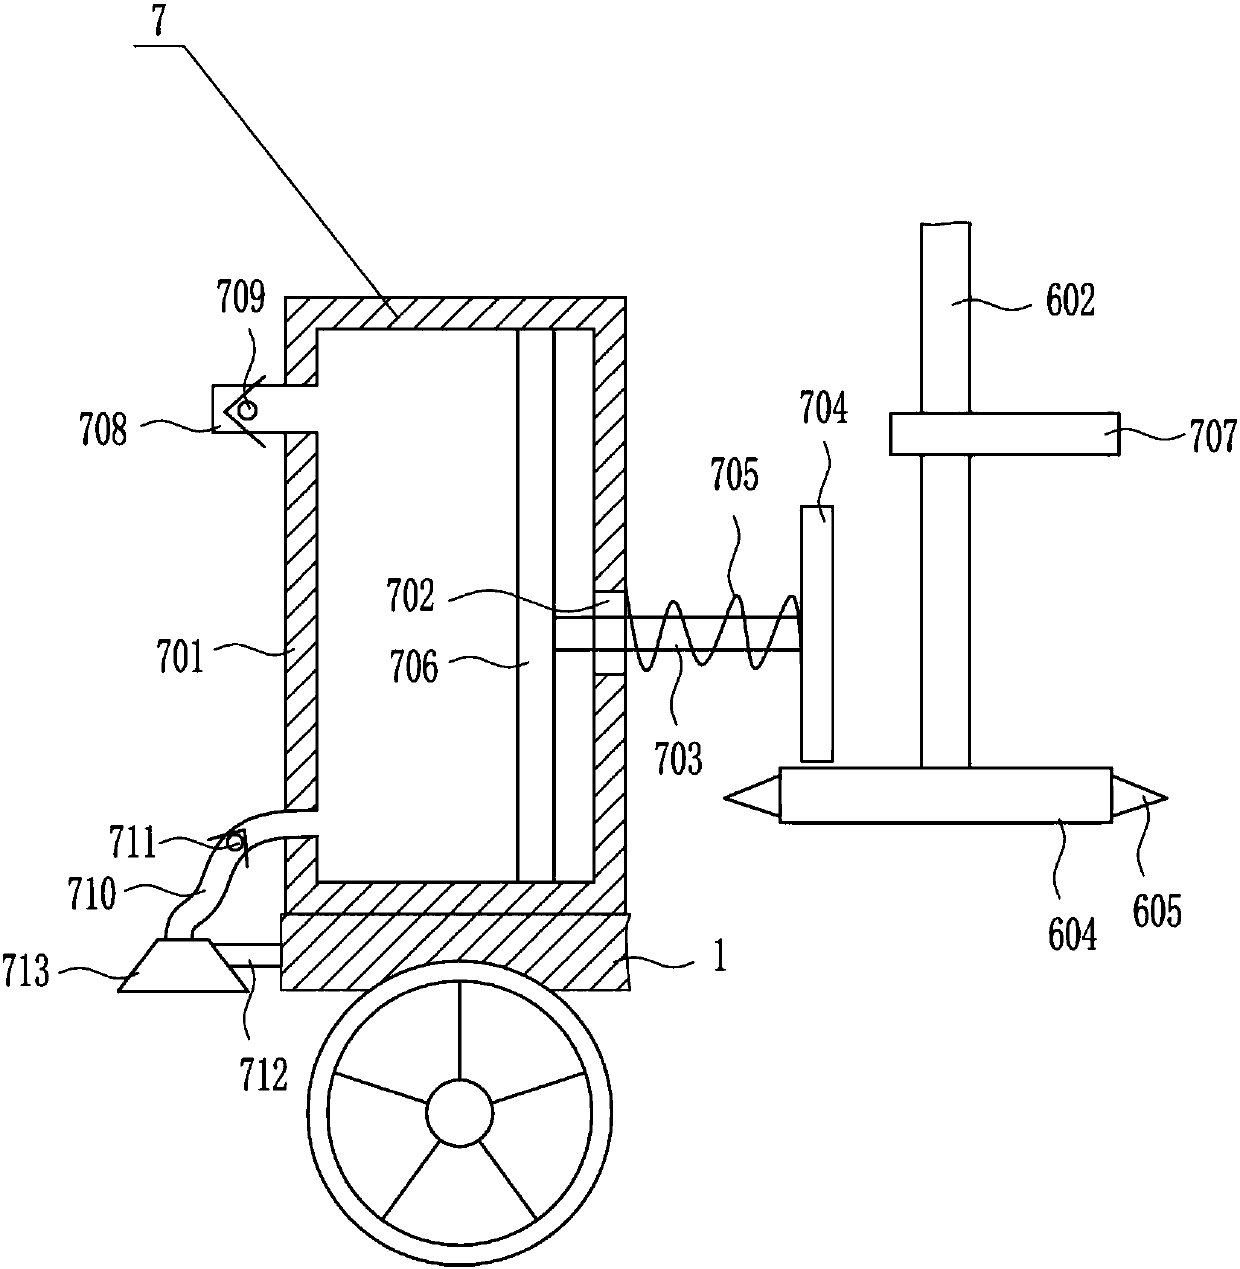 Ground cleaning device for petroleum exploration